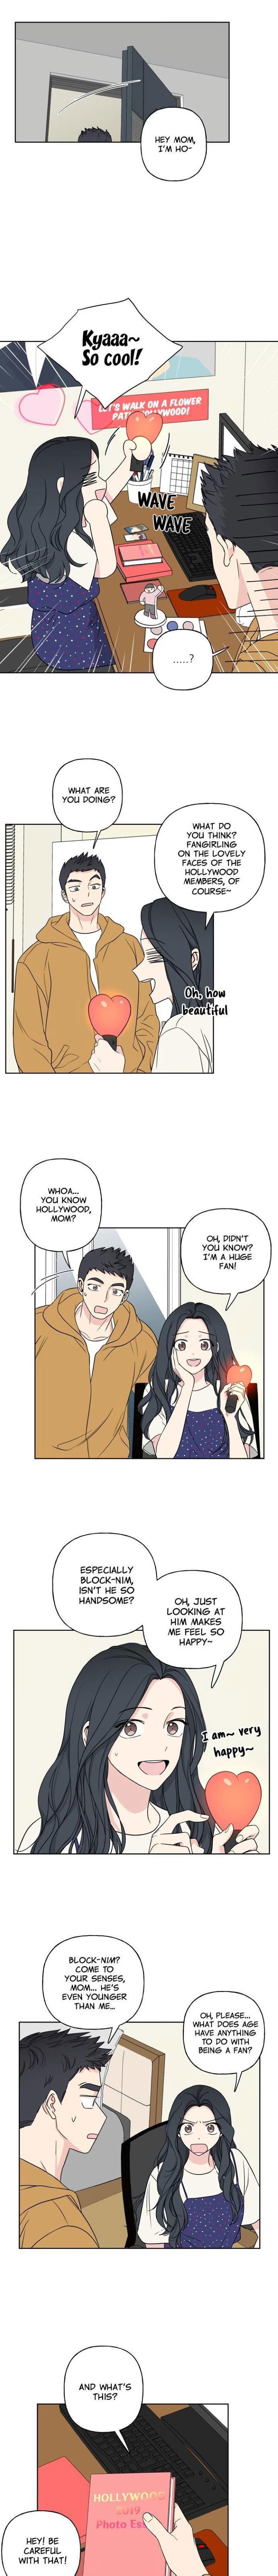 mother-im-sorry-chap-20-2